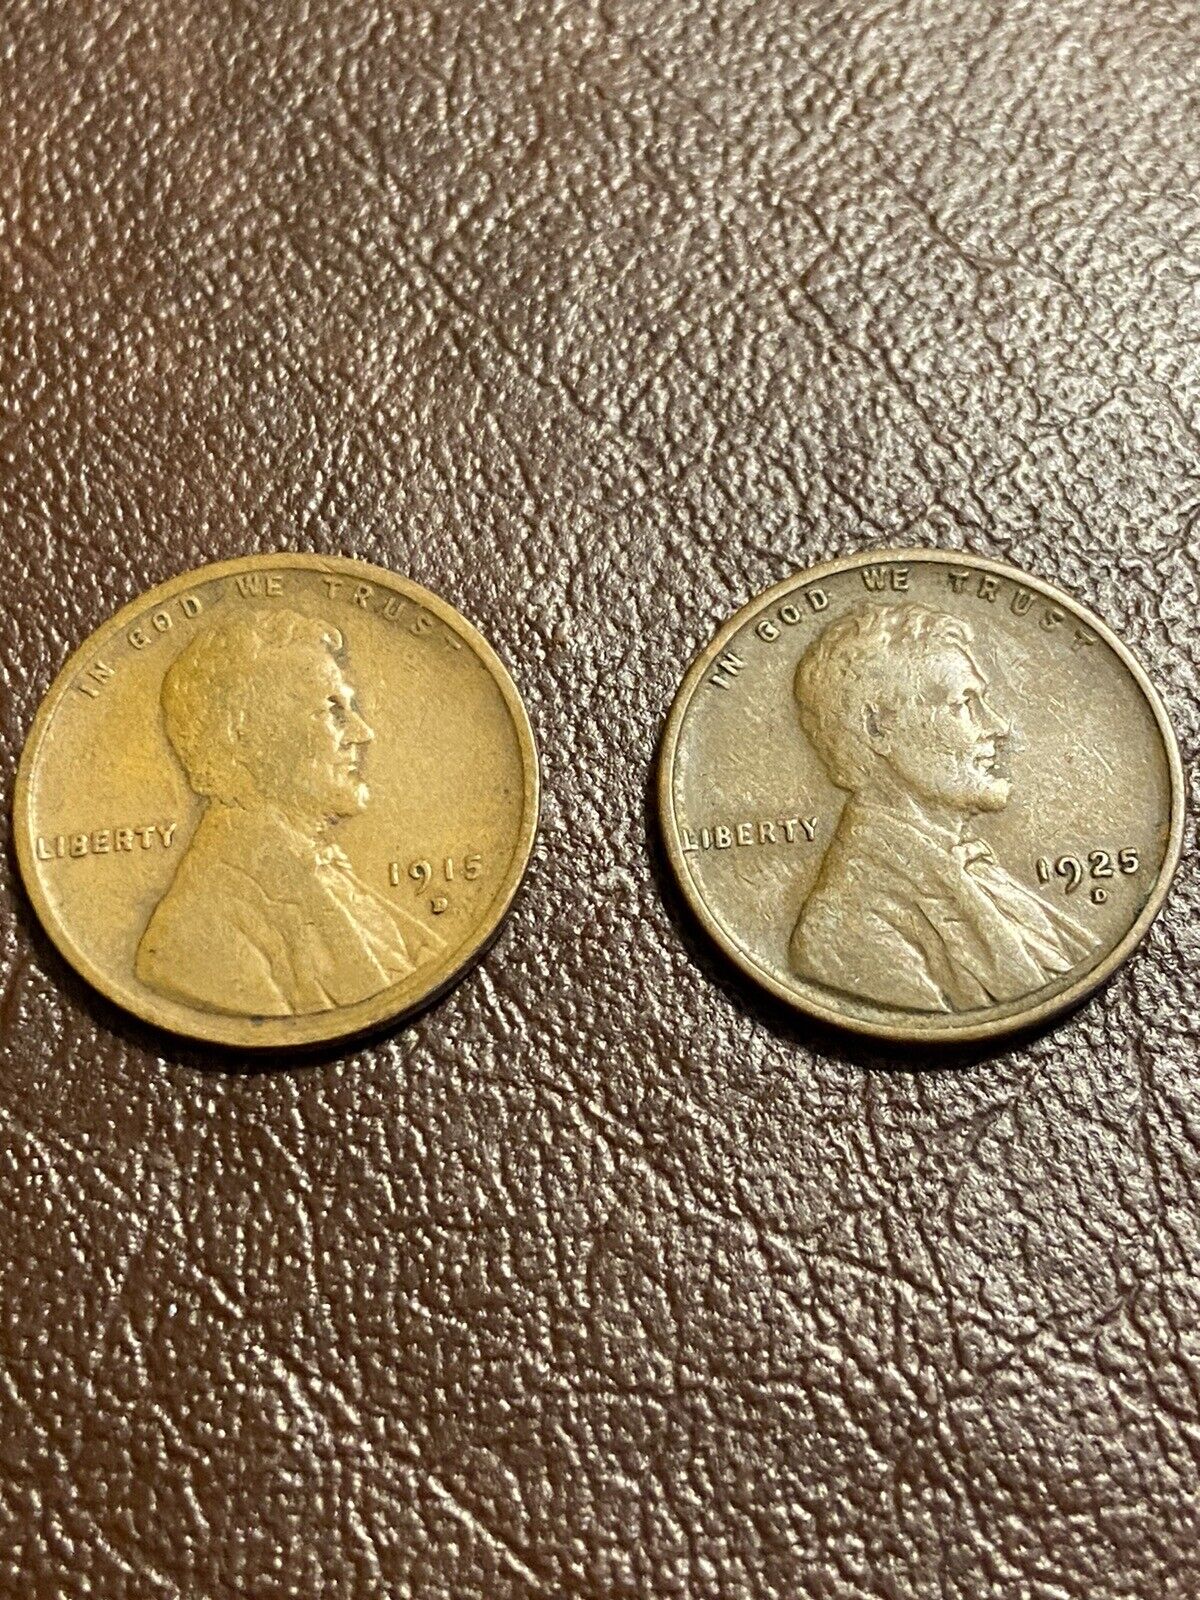 1915-D And 1925-D Lincoln Cent.  Both Coins Very Collectible.